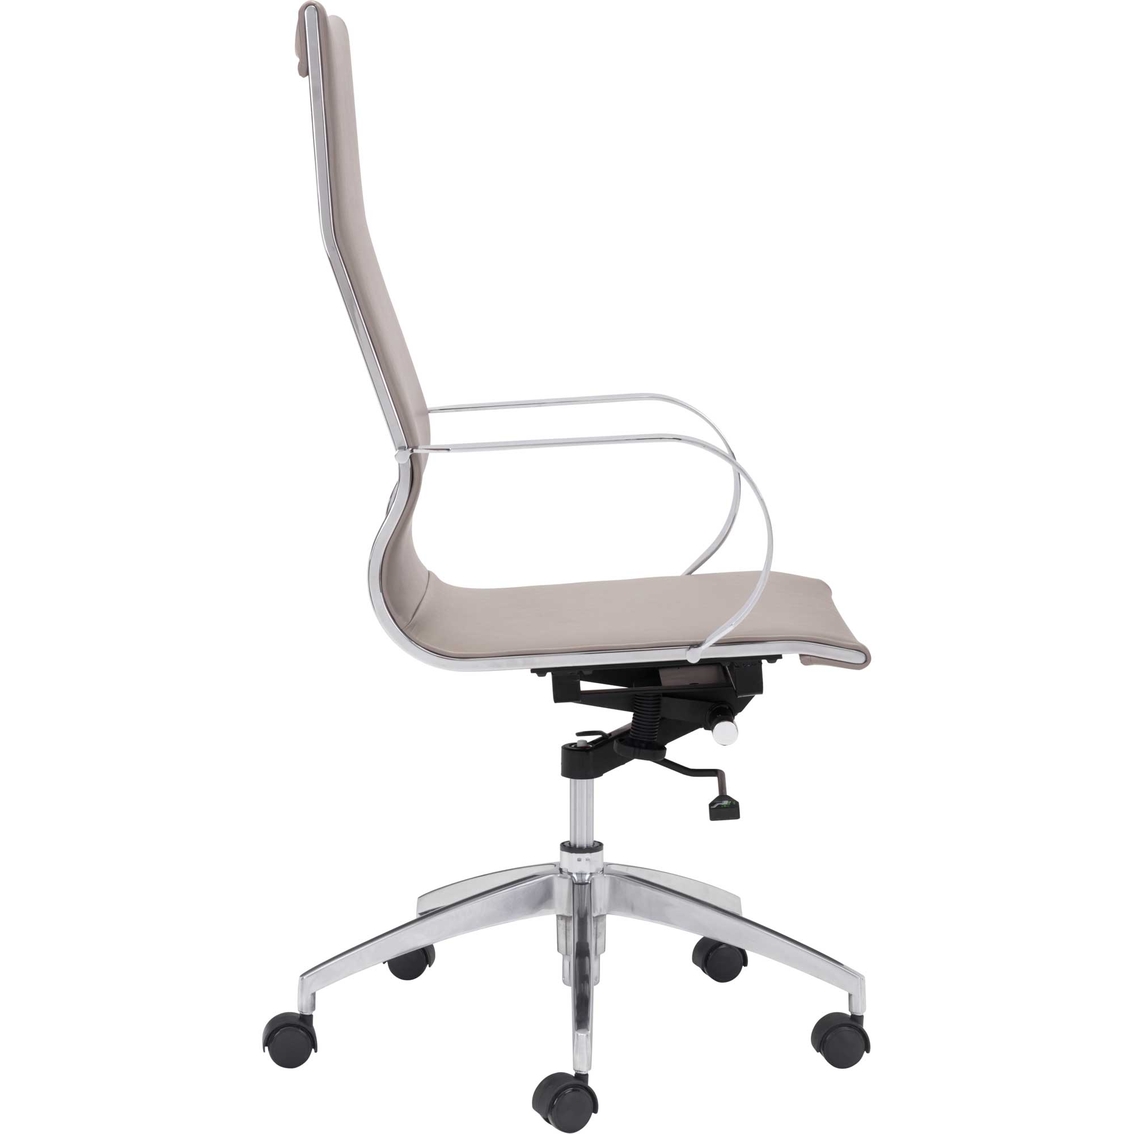 Zuo Modern Glider Hi Back Office Chair - Image 2 of 8